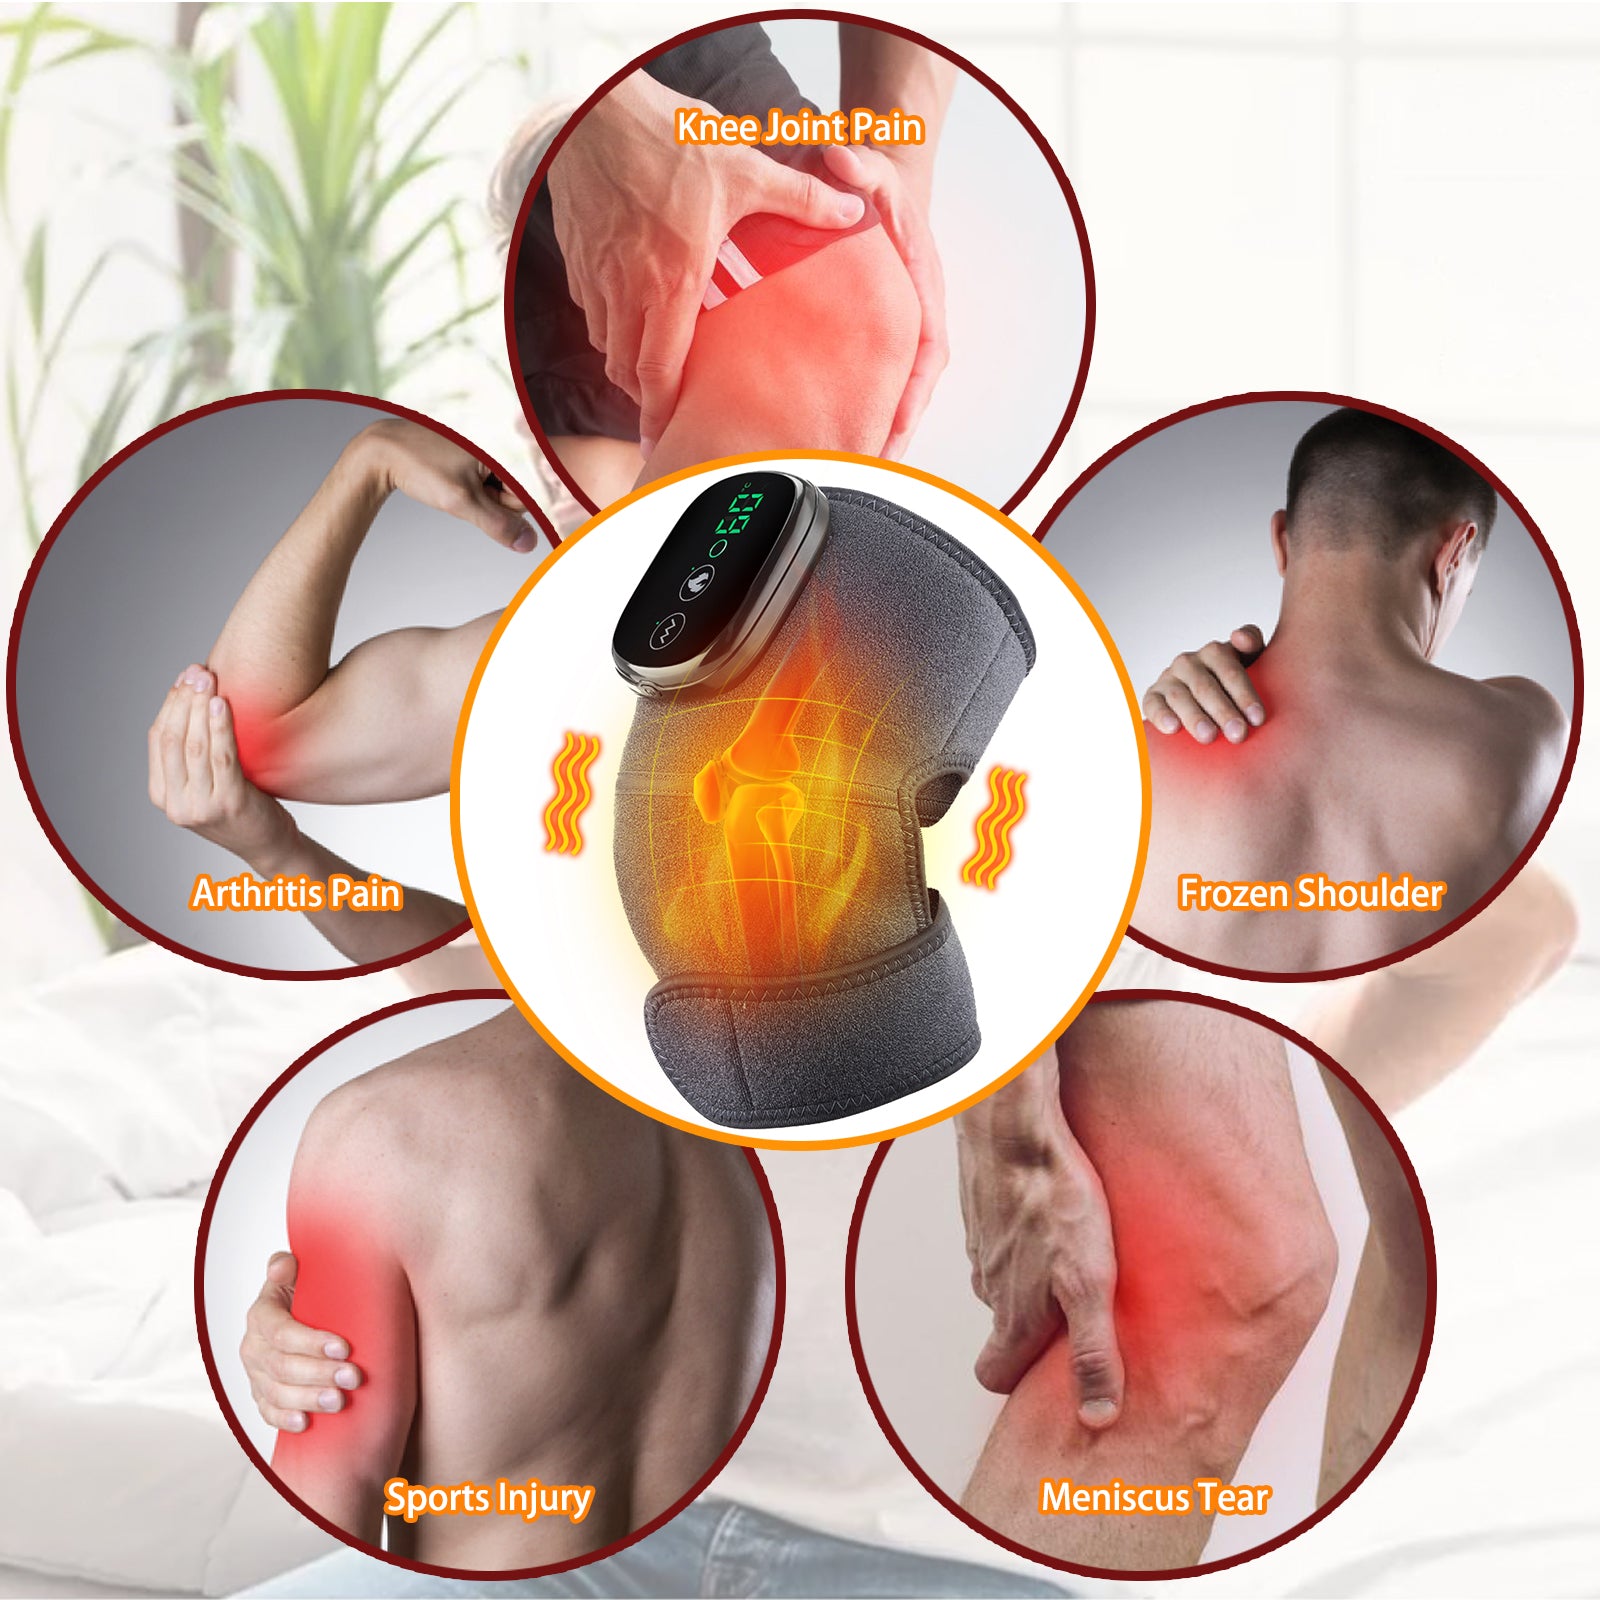 Heated Knee Brace Wrap Massage Vibration Knee Massager with Heating Pad  Thermal